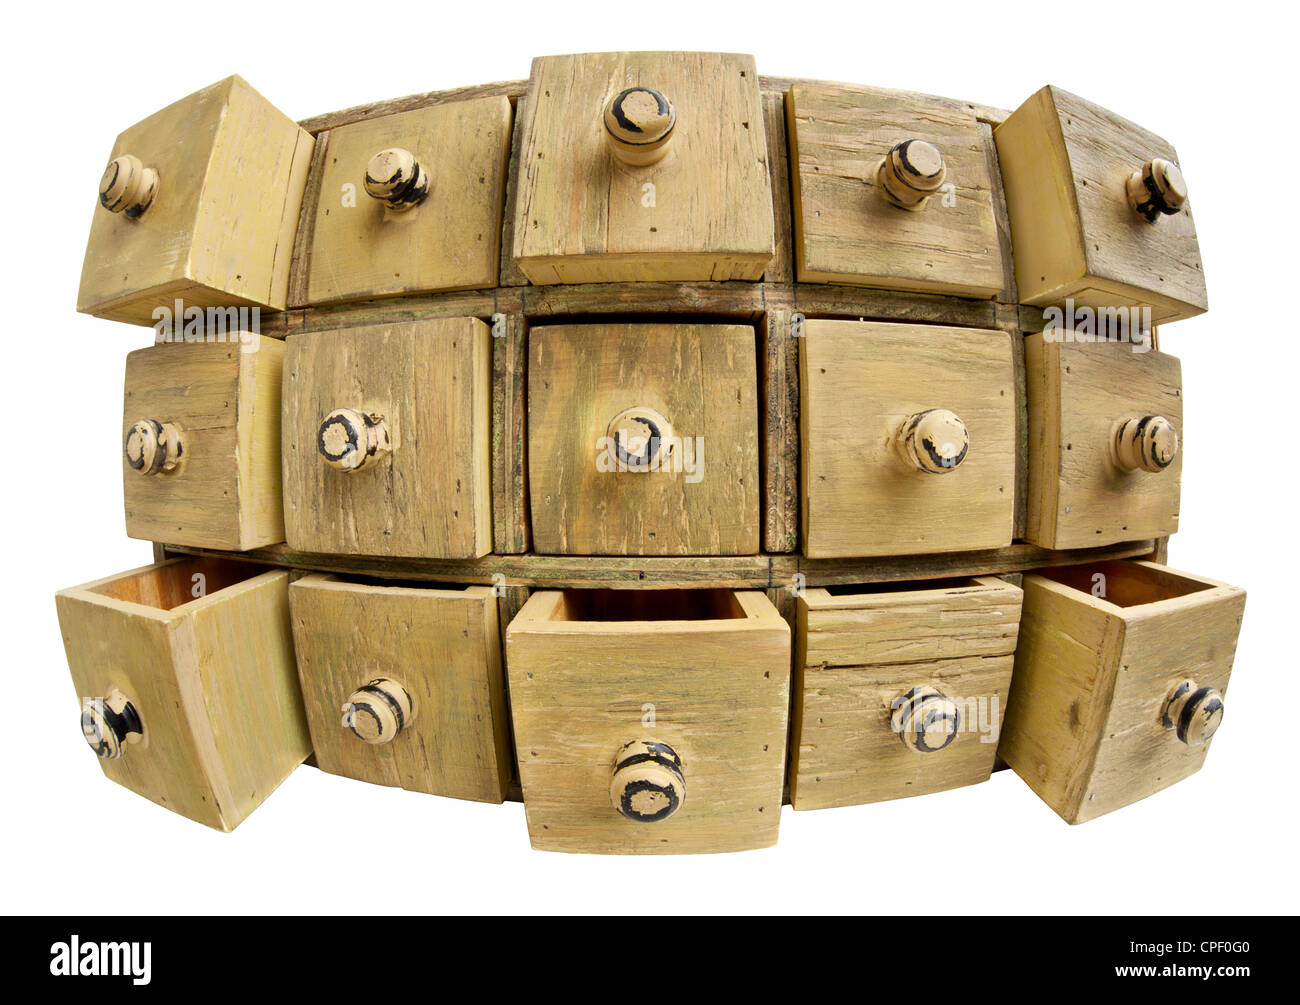 Data Storage Concept 15 Drawers Of A Primitive Wooden Apothecary